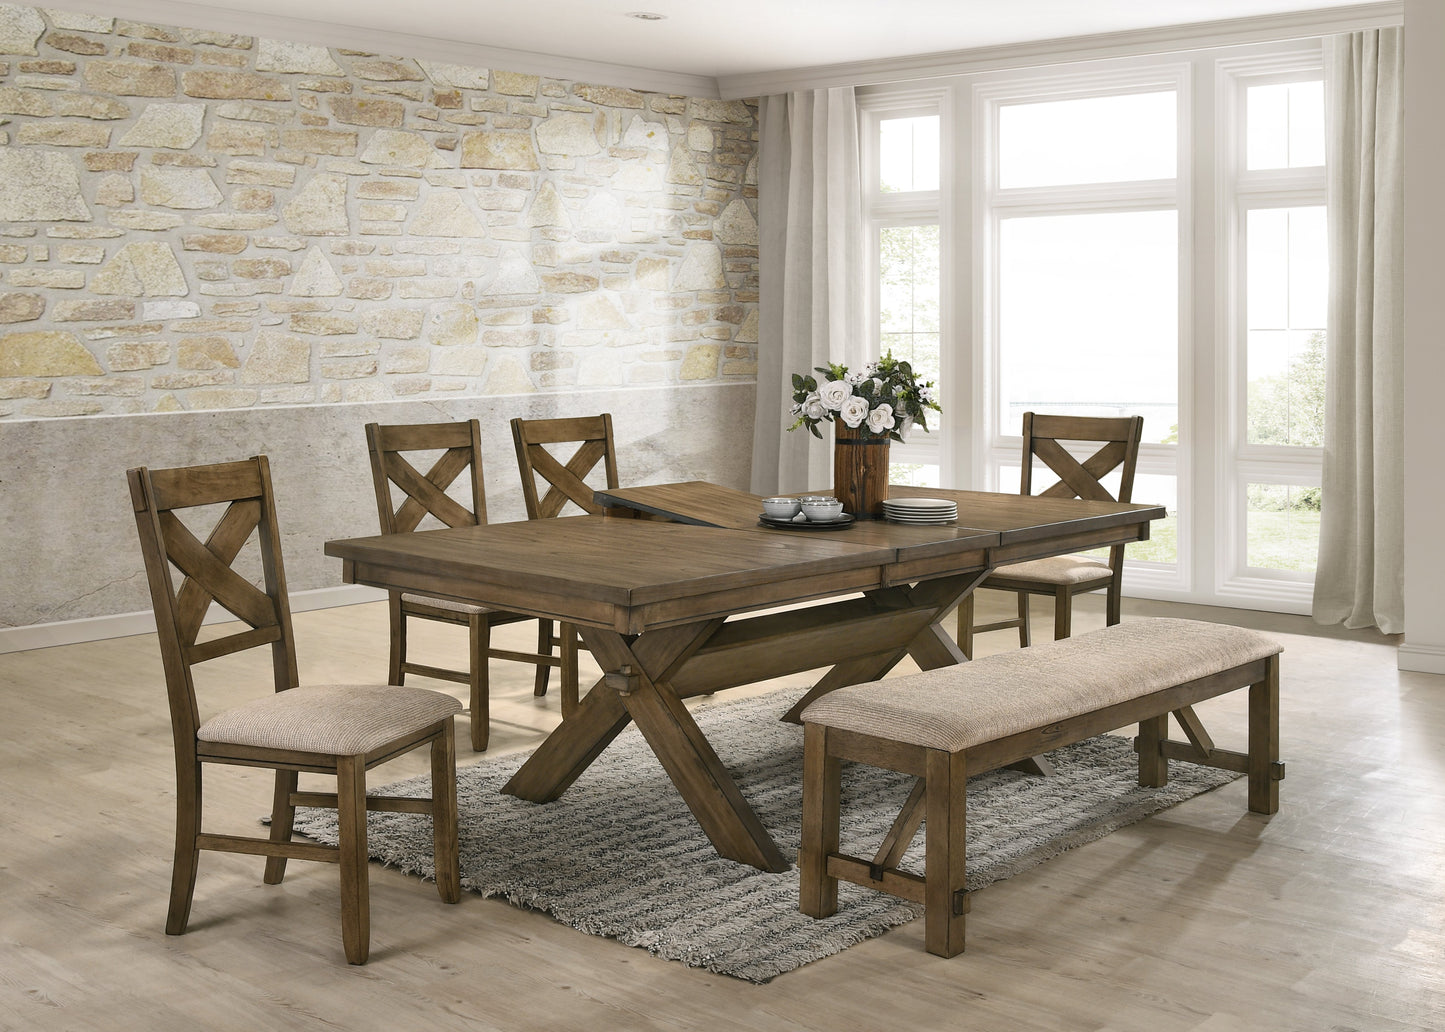 Raven Wood Dining Set: Butterlfy Leaf Table, Four Chairs, Bench